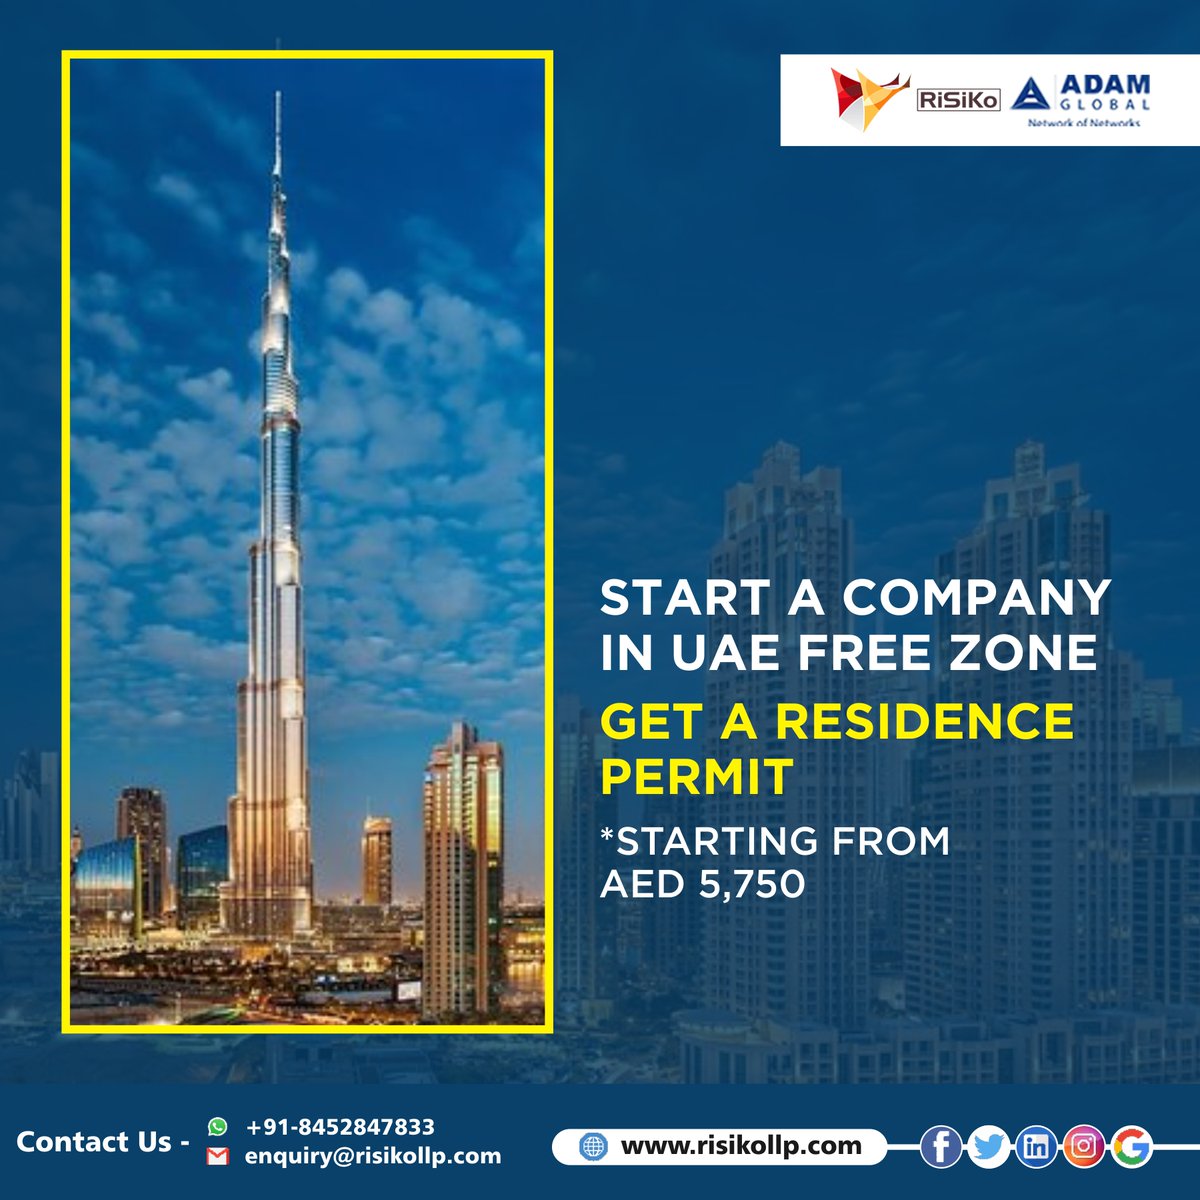 Start a company in USA free zone .
Get a residence permit.
.
.
.
.
.
#Dubai #India #newsetup #company #risikollp #adamglobal #business #companyindubai #financial #adamglobal #globalnetwork #growth #opportunities #businessgrowth #experts #likemindedpeople #businessleads #business